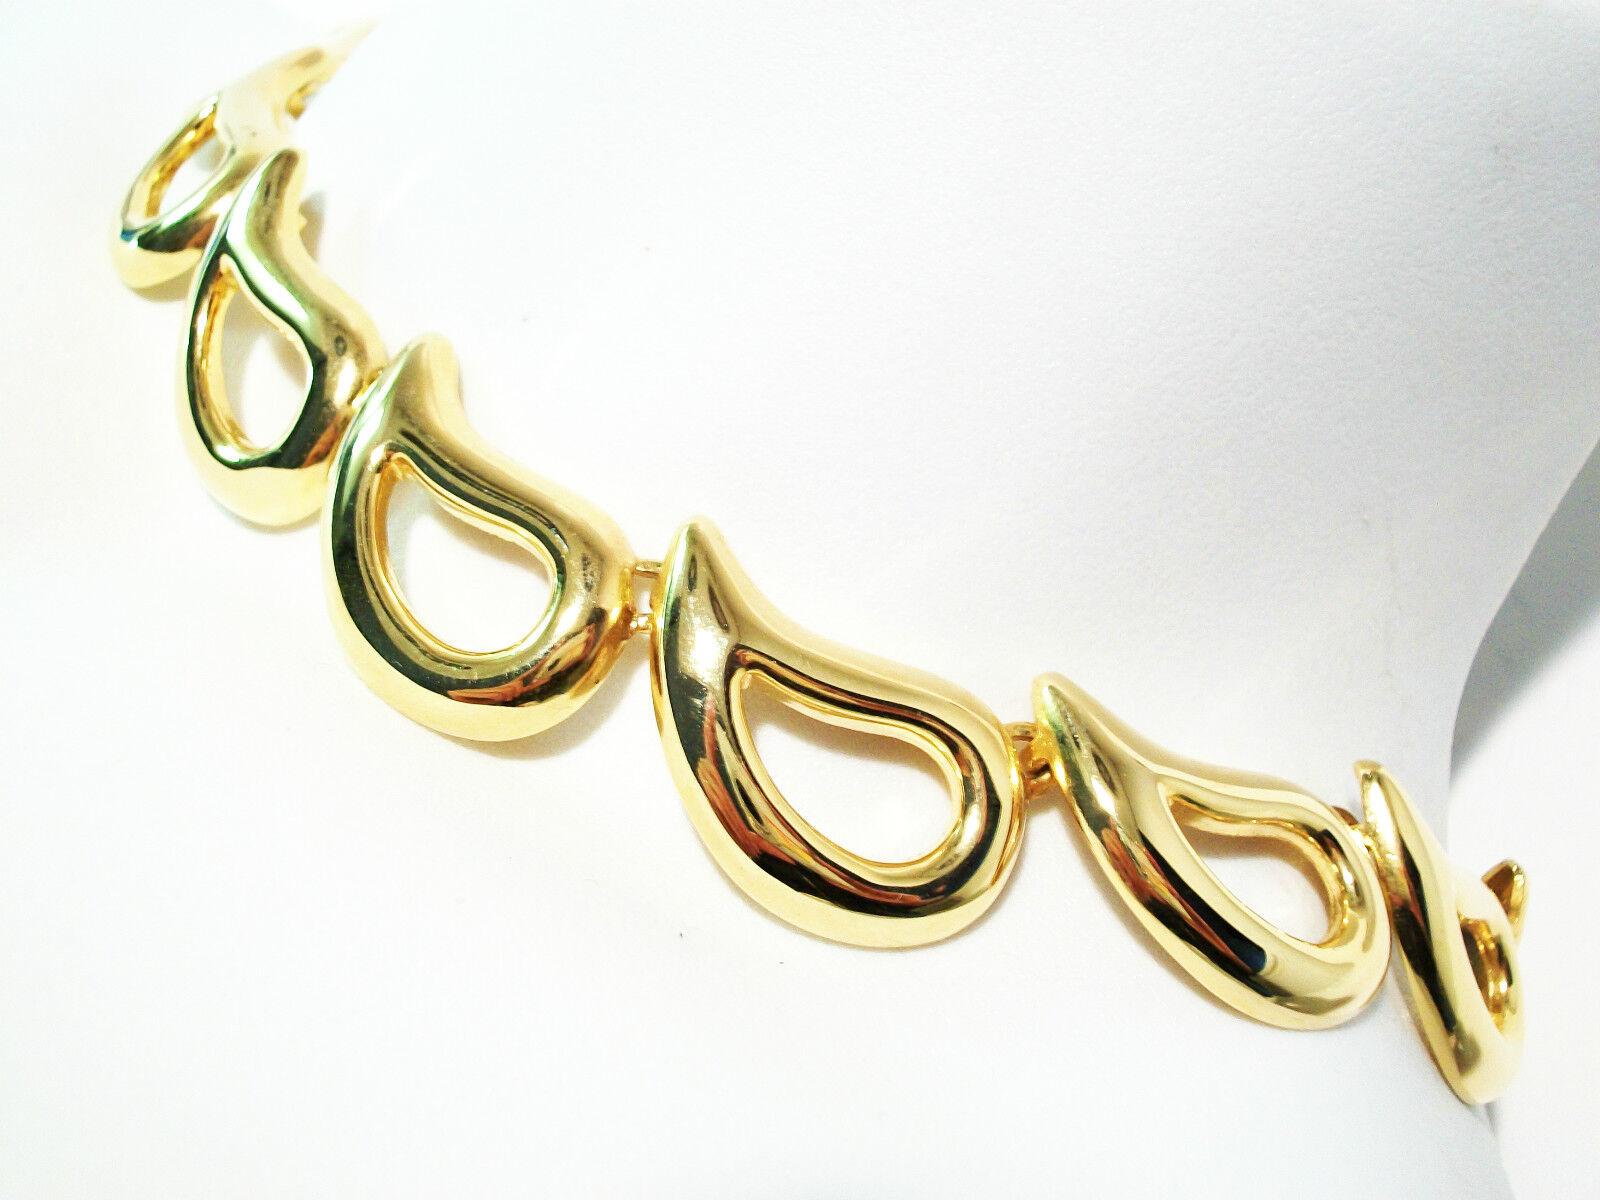 Vintage Gold Tone Teardrop Design Necklace - Toggle Closure - Unsigned - C. 1980 In Good Condition For Sale In Chatham, CA